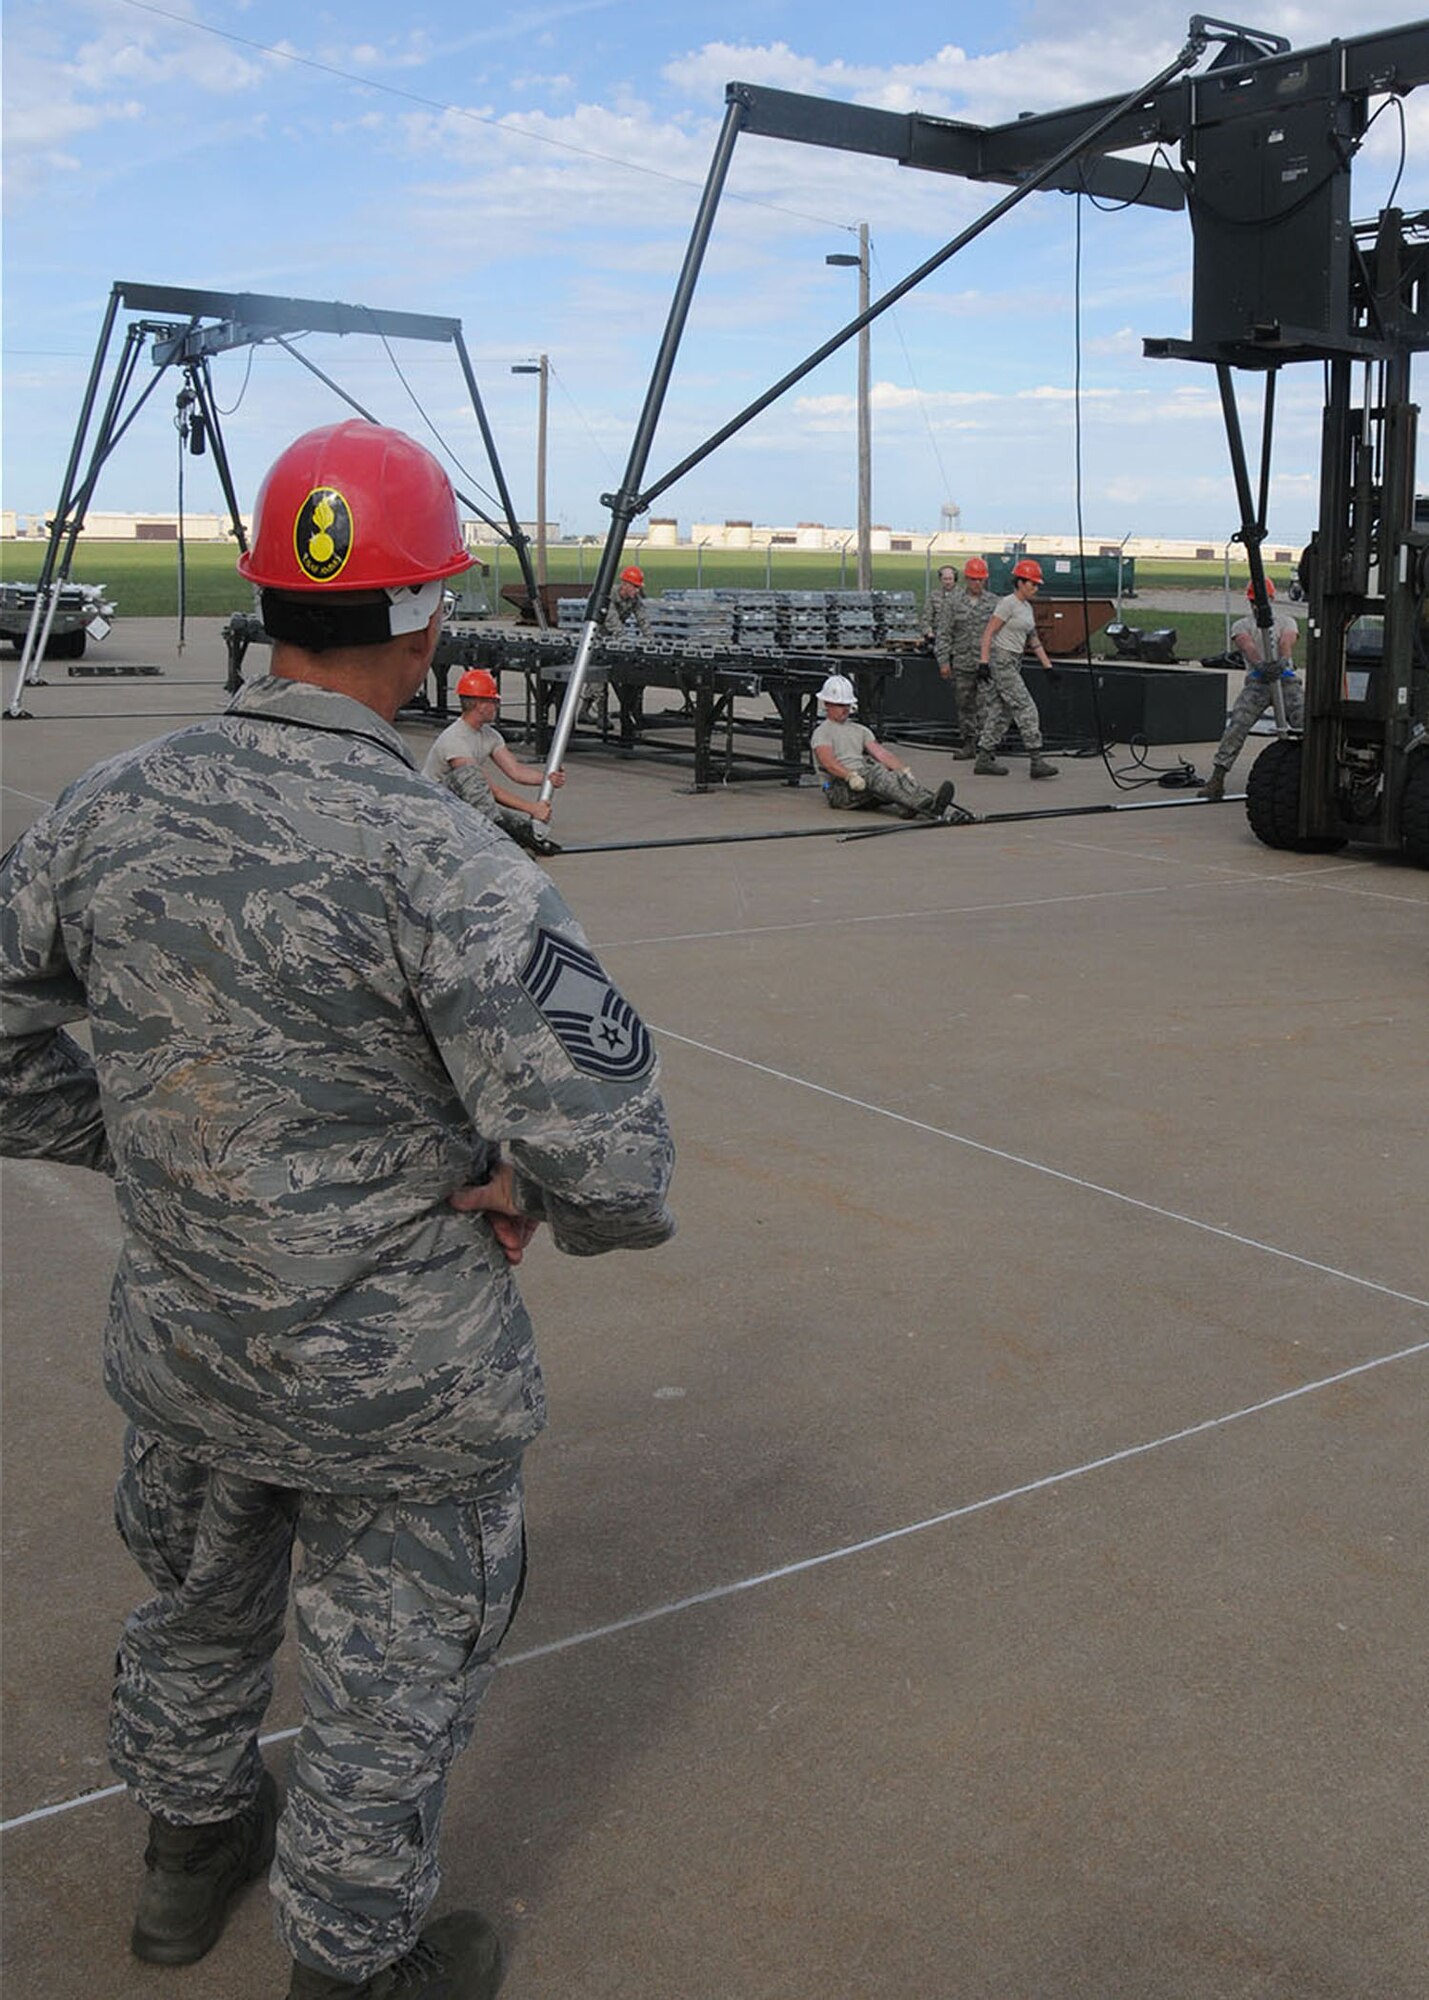 Chief Master Sgt. Erick Hays, one of the Global Strike Command evaluators, watches on as Airmen from the Whiteman Air Force Base munitions squadron construct a munitions assembly conveyor as part of the October 2014 Global Strike Challenge.  The Global Strike Challenge is designed to promote esprit de corps, recognize the Air Force’s outstanding Global Strike personnel and teams, and to improve capabilities through competition. (U.S. Air National Guard photo by Senior Airman Nathan Dampf/RELEASED)